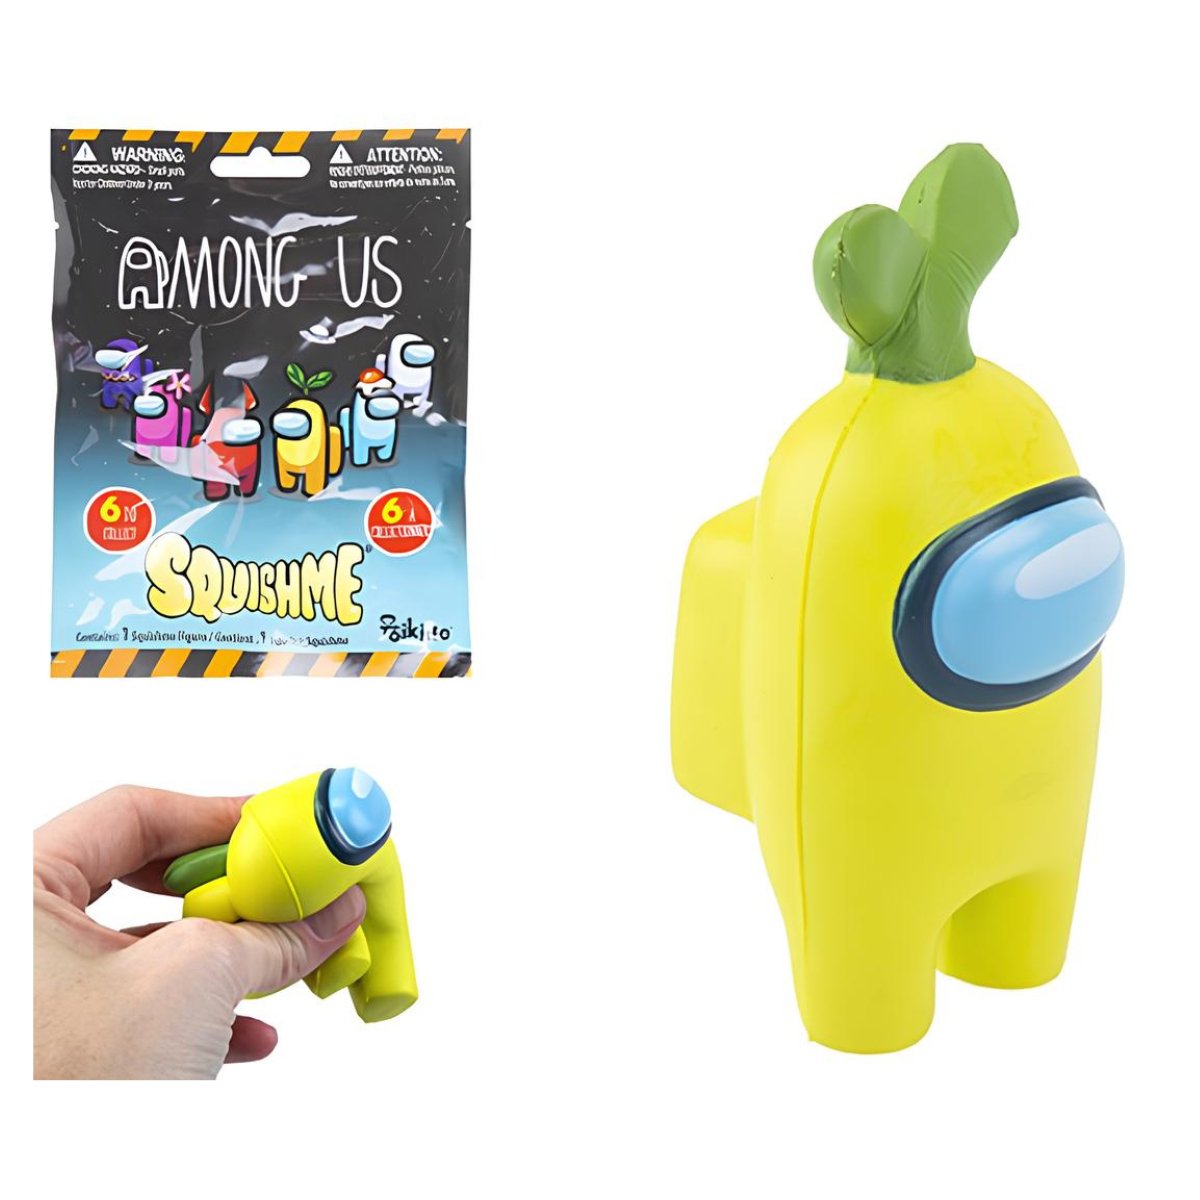 Among Us Squishme Surprise Figure - Kids Party Craft